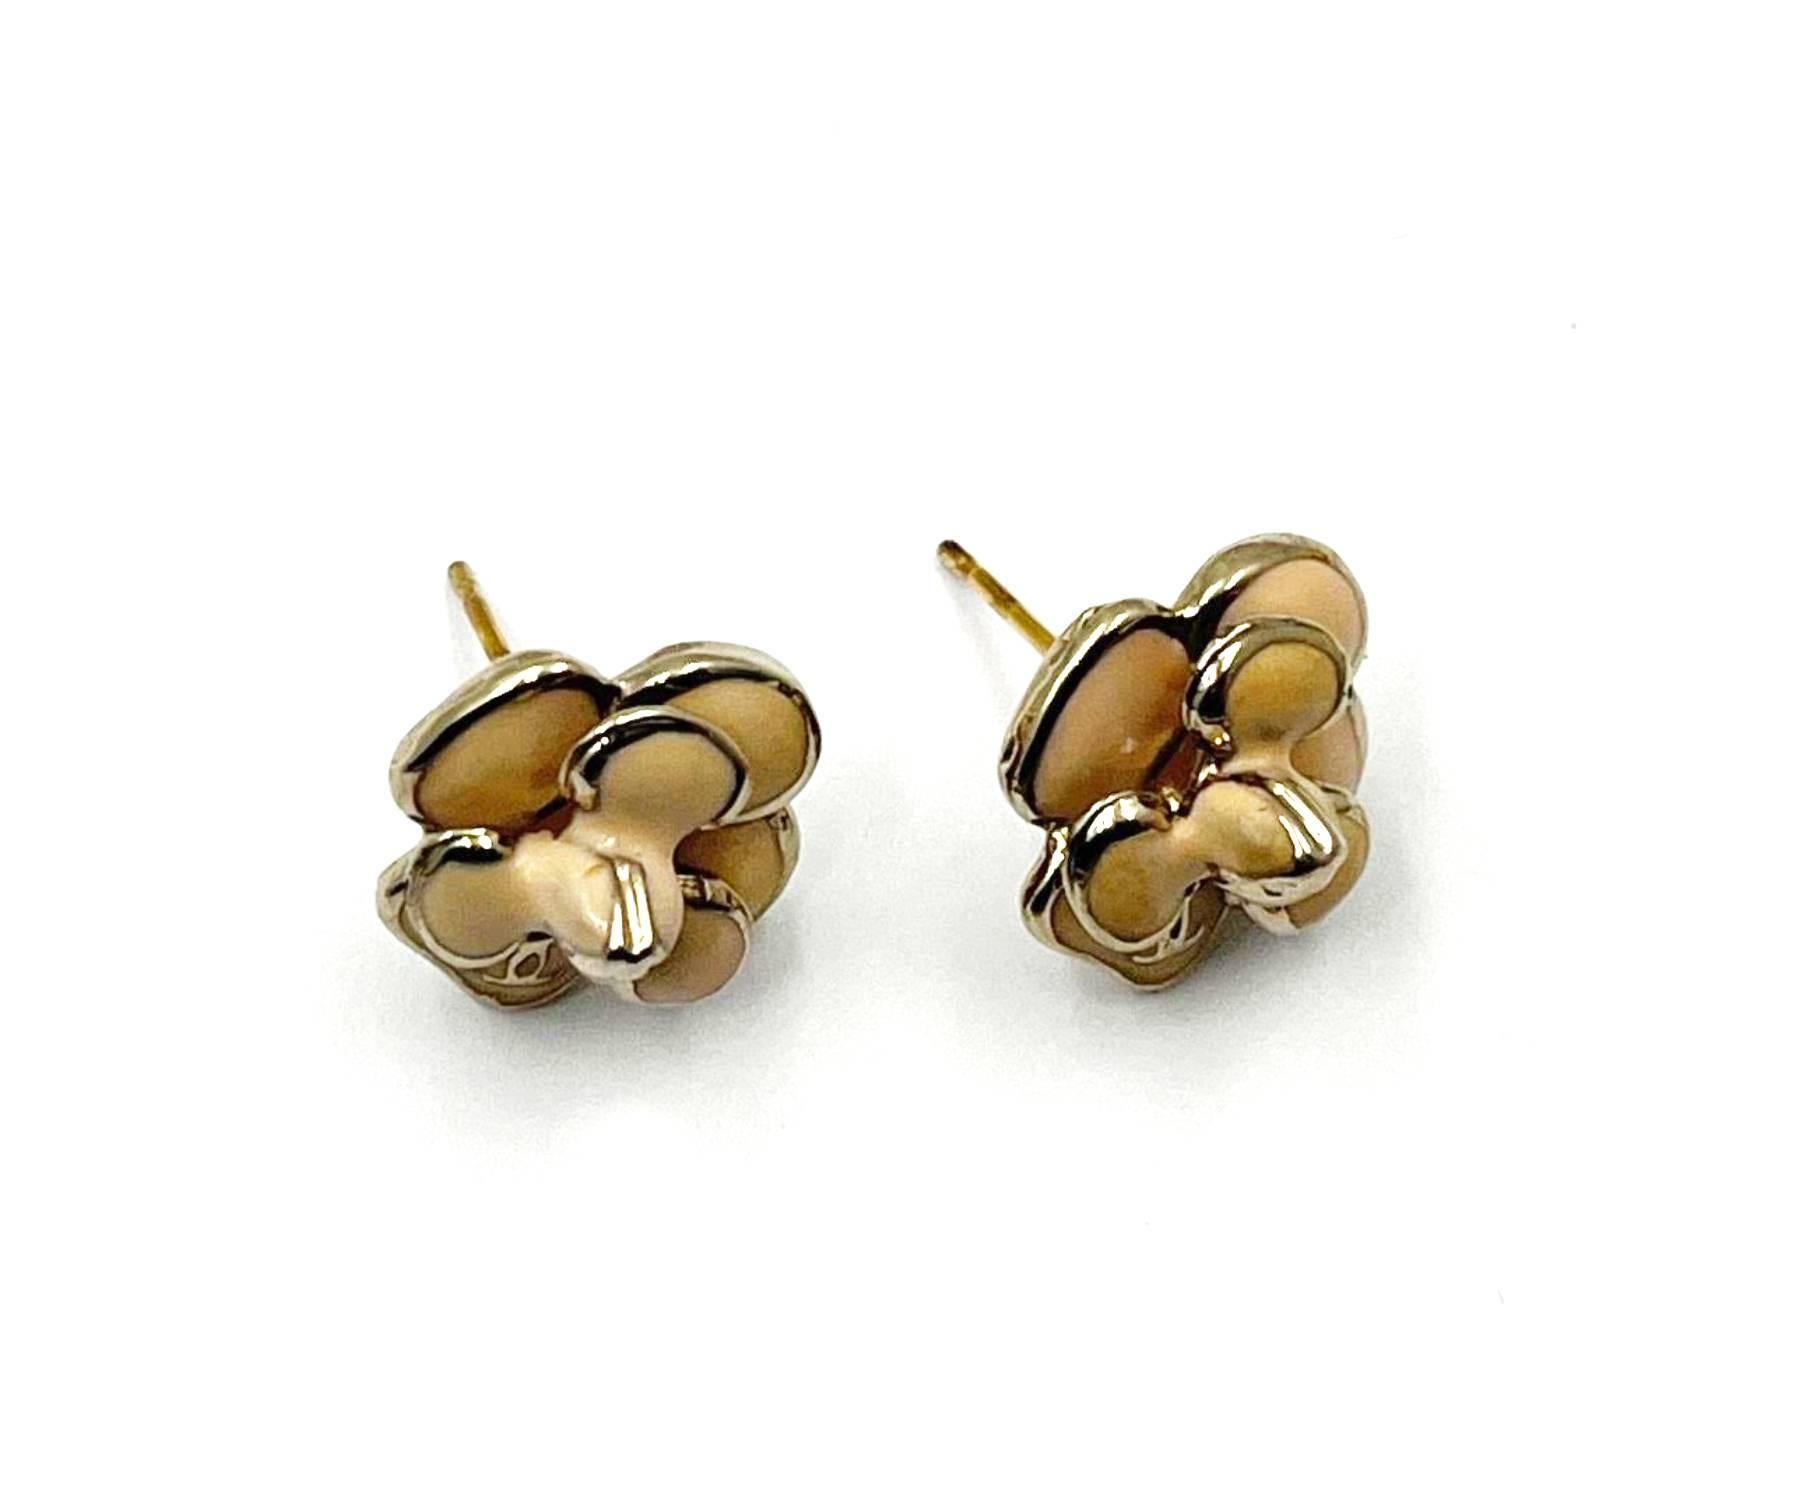 Chanel Gold CC Beige Flower Small Piercing Earrings

*Marked 08
*Made in France

-Approximately 0.5″ x 0.5″
-Very classic and pretty
-In a very good condition

1038- 44422